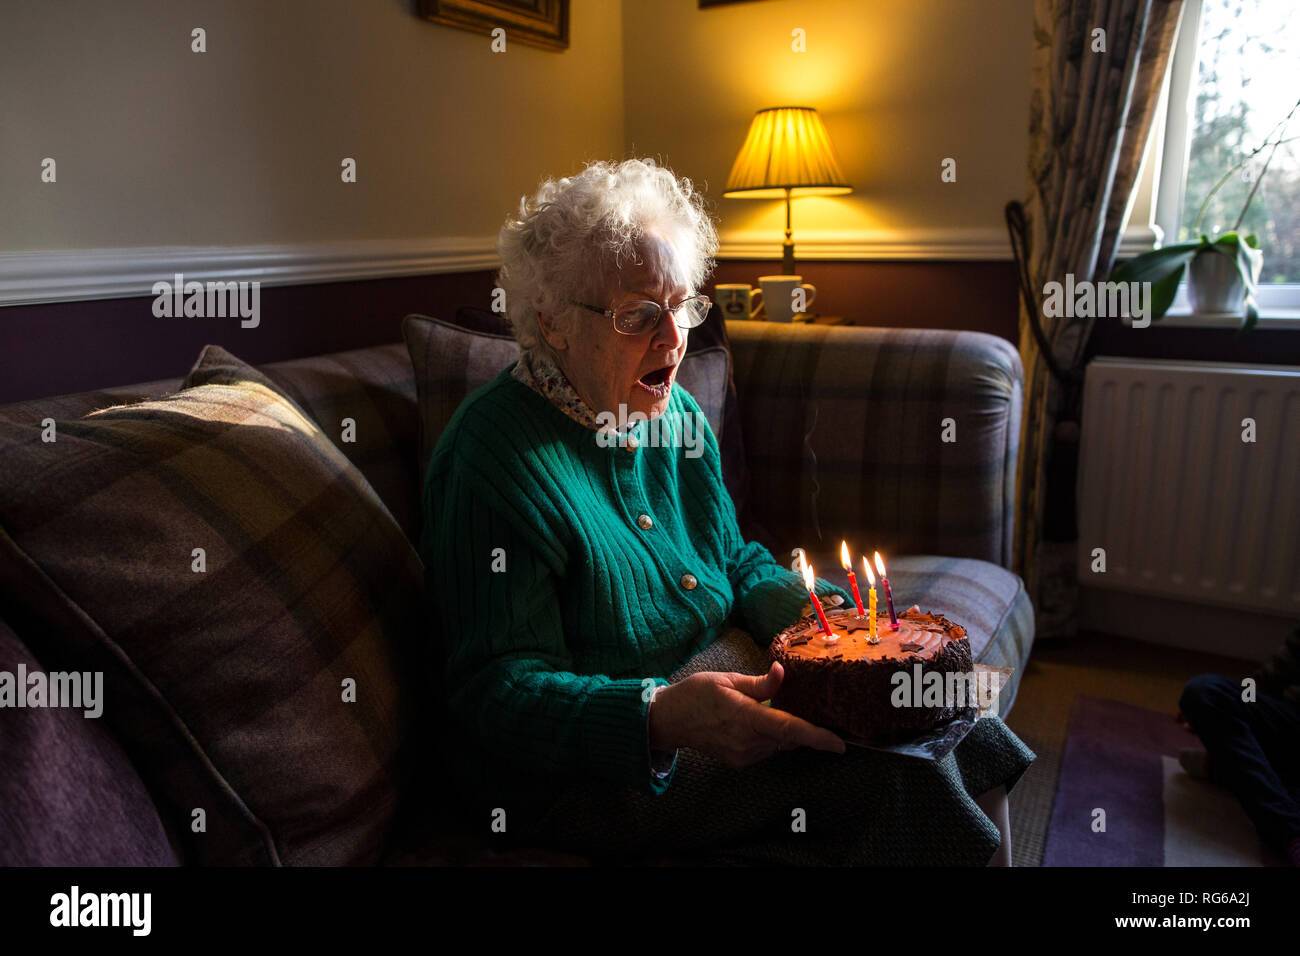 Elderly woman celebrating her birthday with a cake whilst blowing out the candles, England, United Kingdom Stock Photo